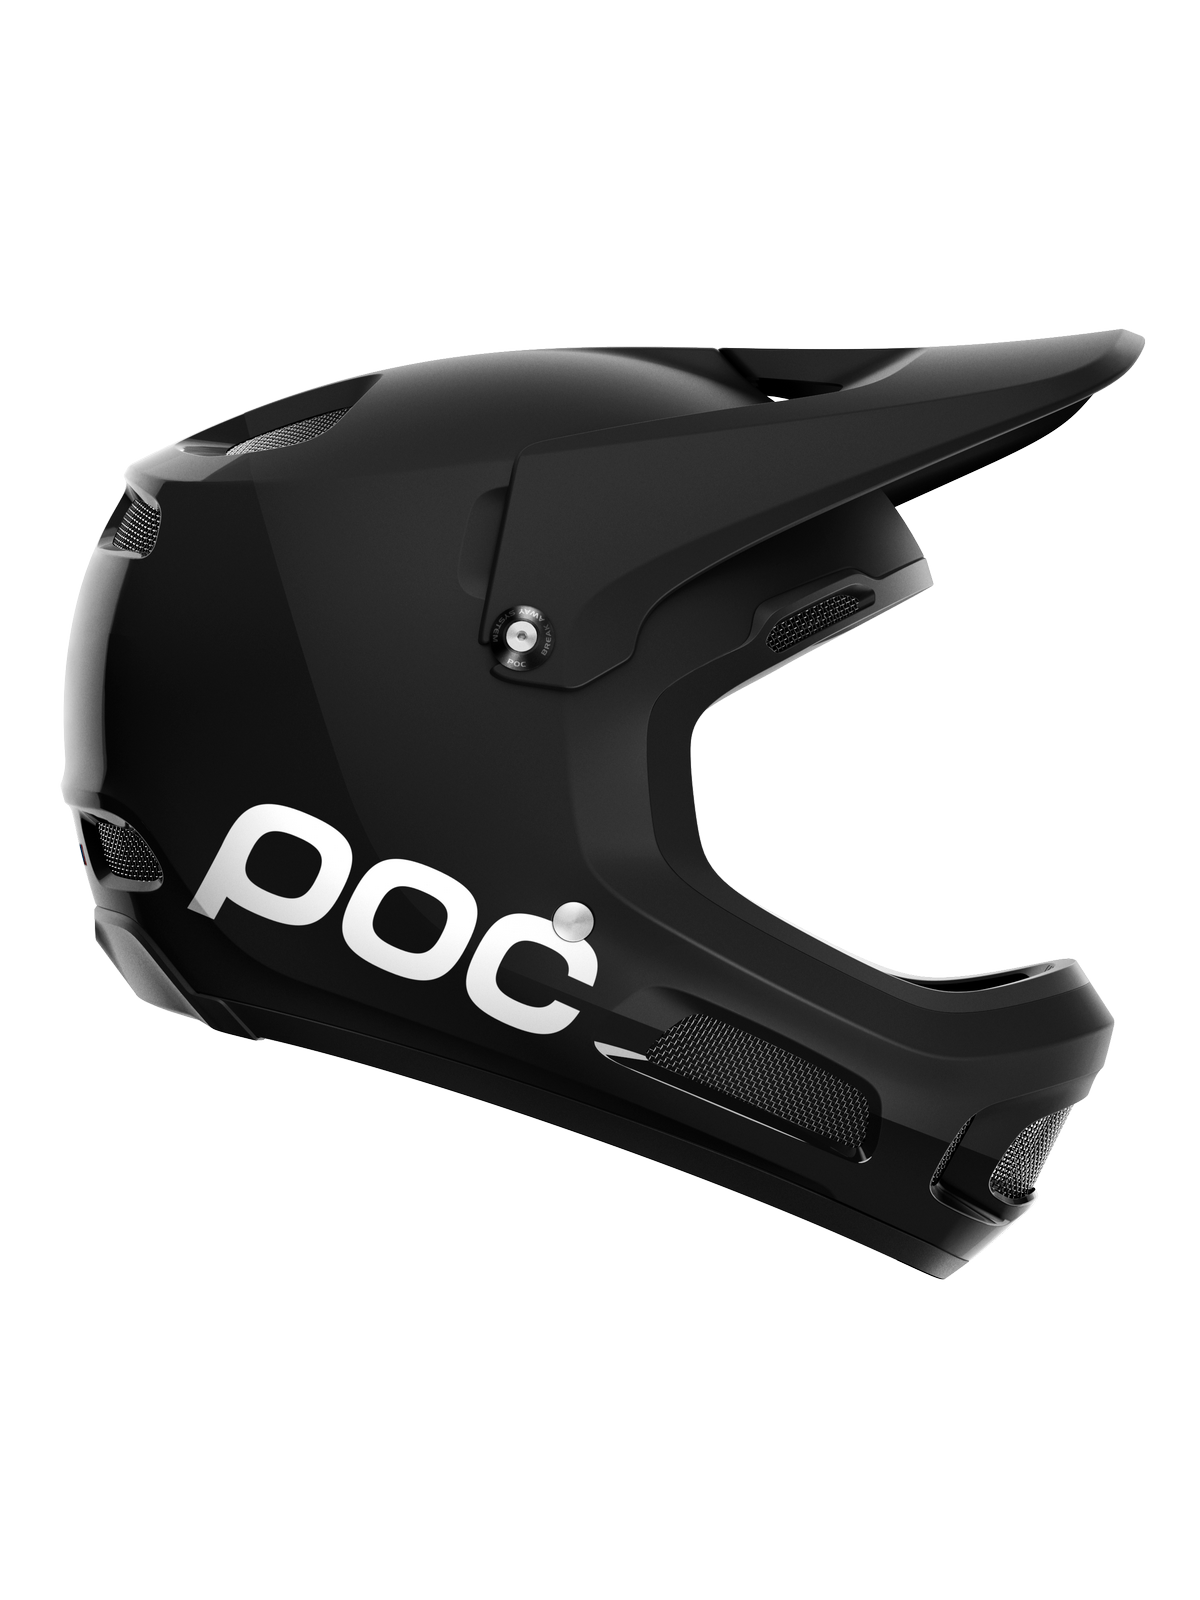 Kask Rowerowy POC CORON AIR SPIN